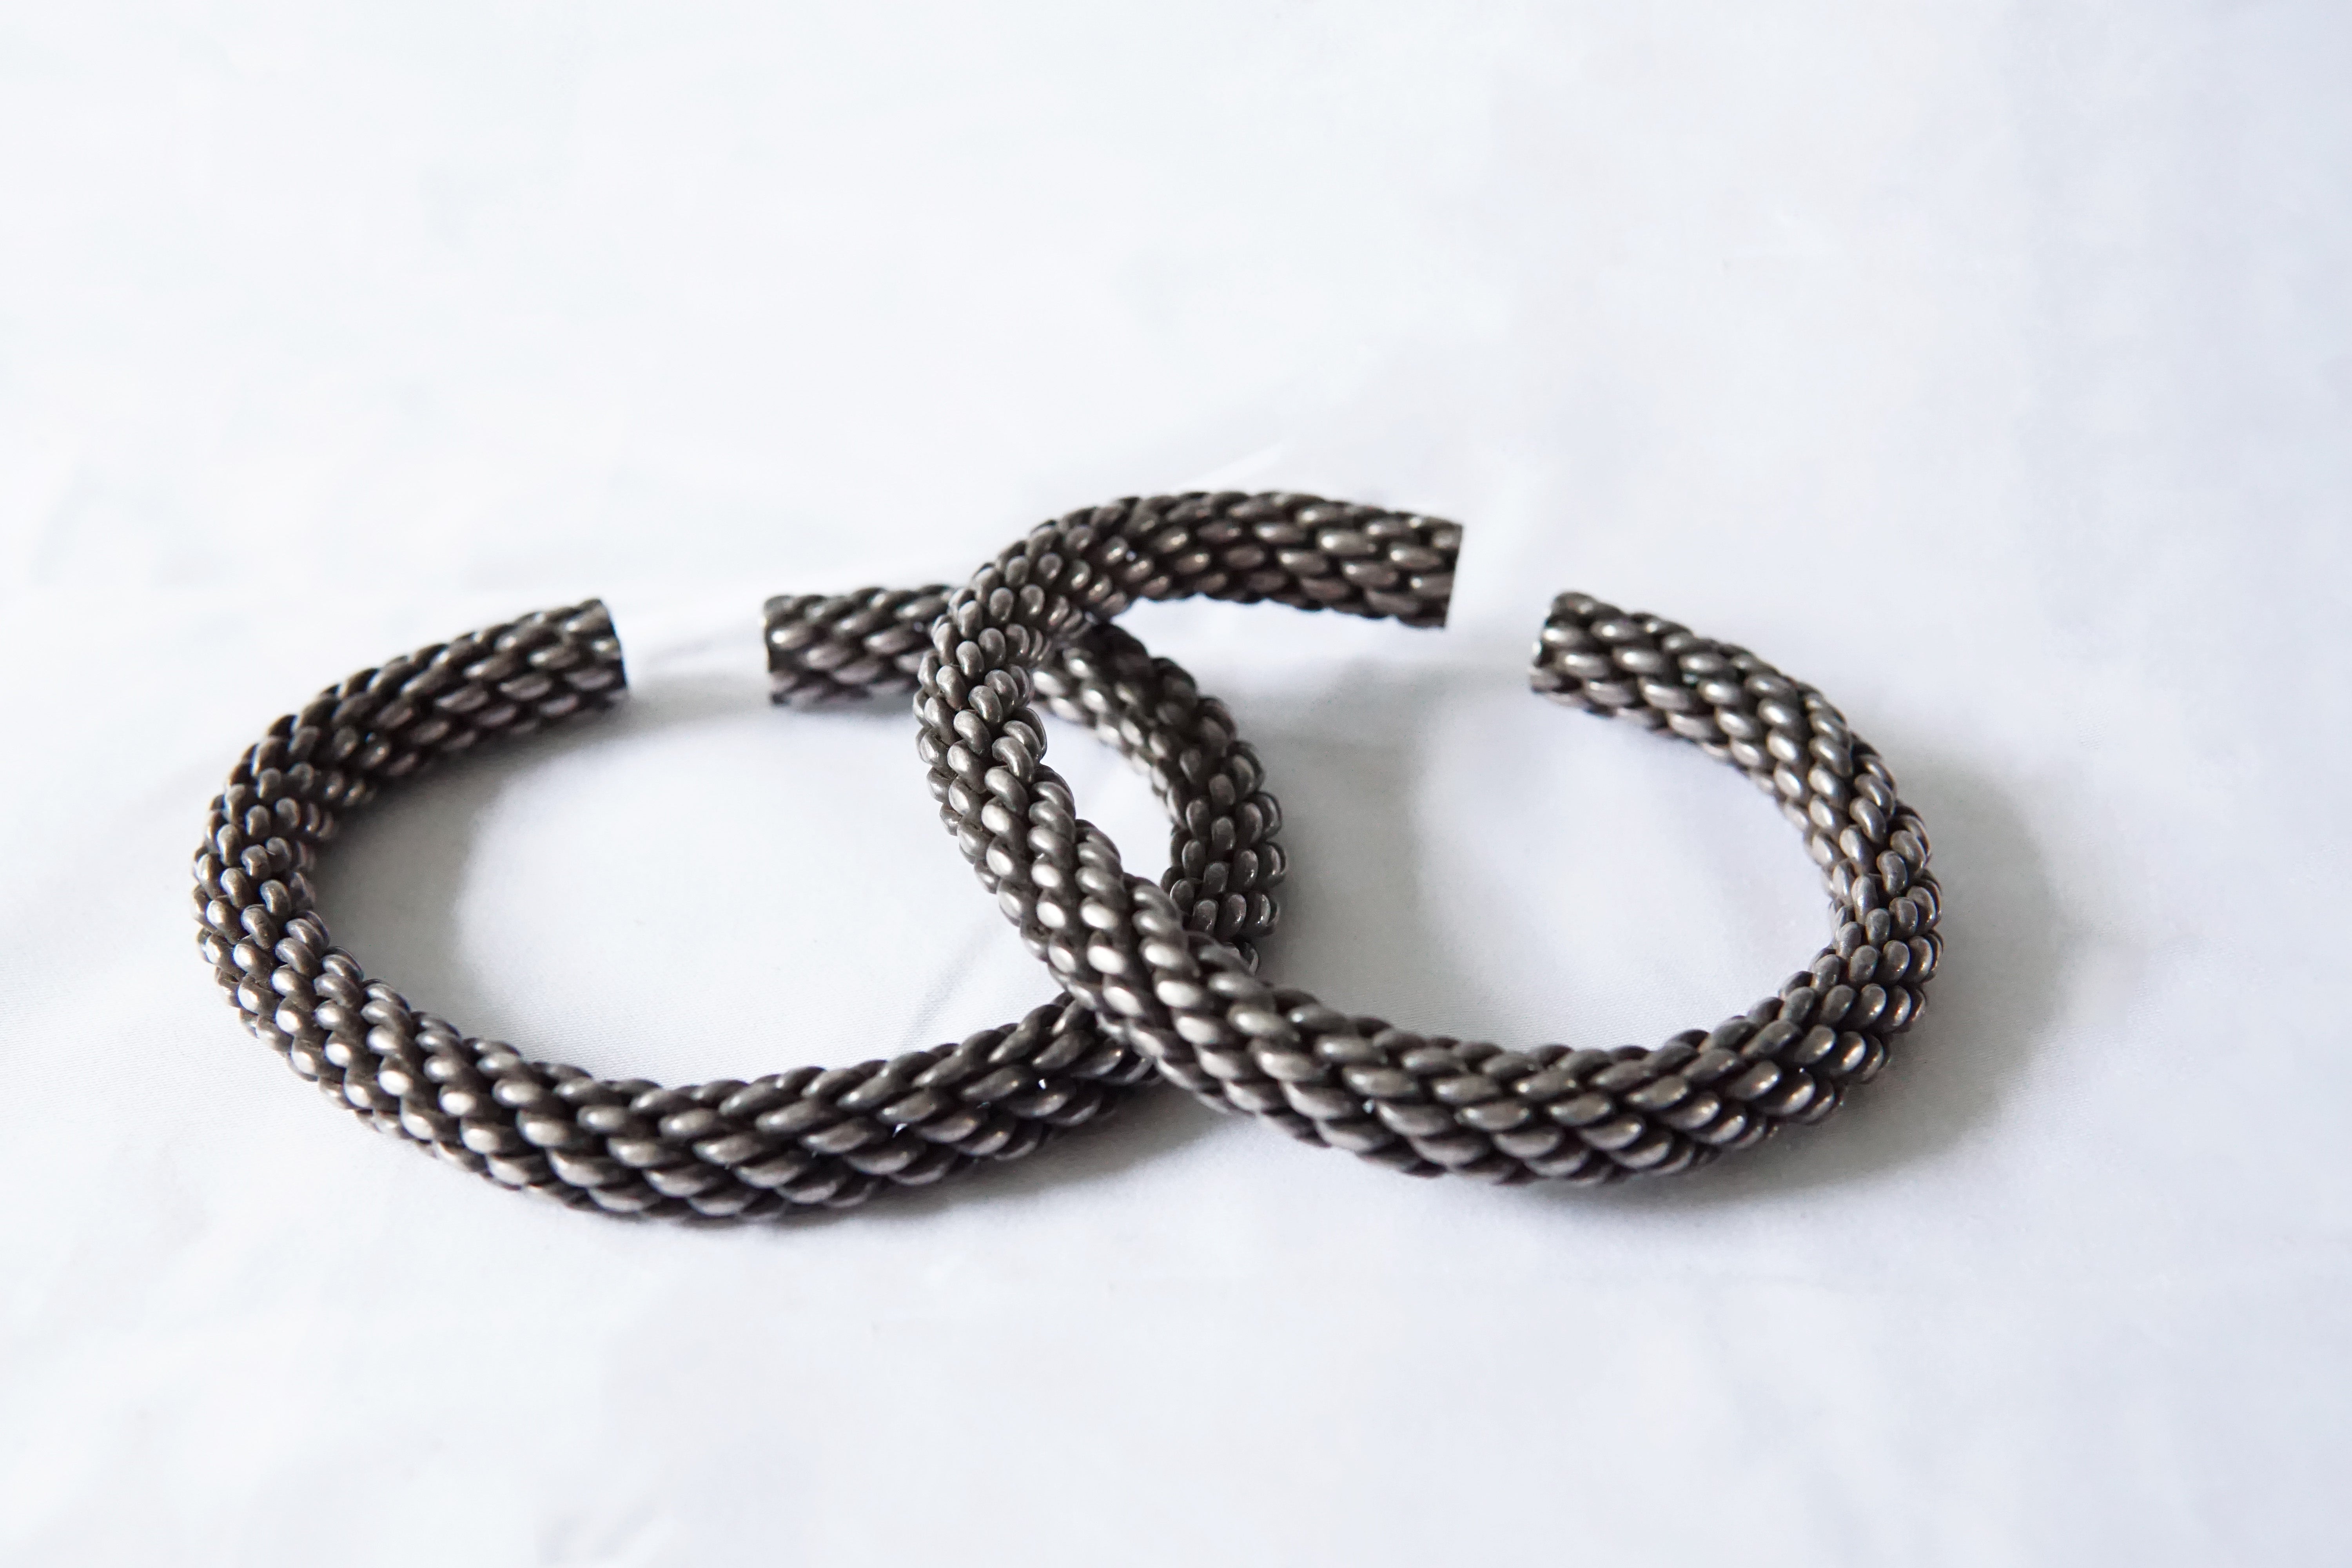 This pair of Akha tribe bracelets are smaller and thinner than the majority of Akha woven silver bracelets encompassing this spiral design, the Akha tribe lives on the hills bordering Laos, Thailand, and Burma. Despite the size, they are